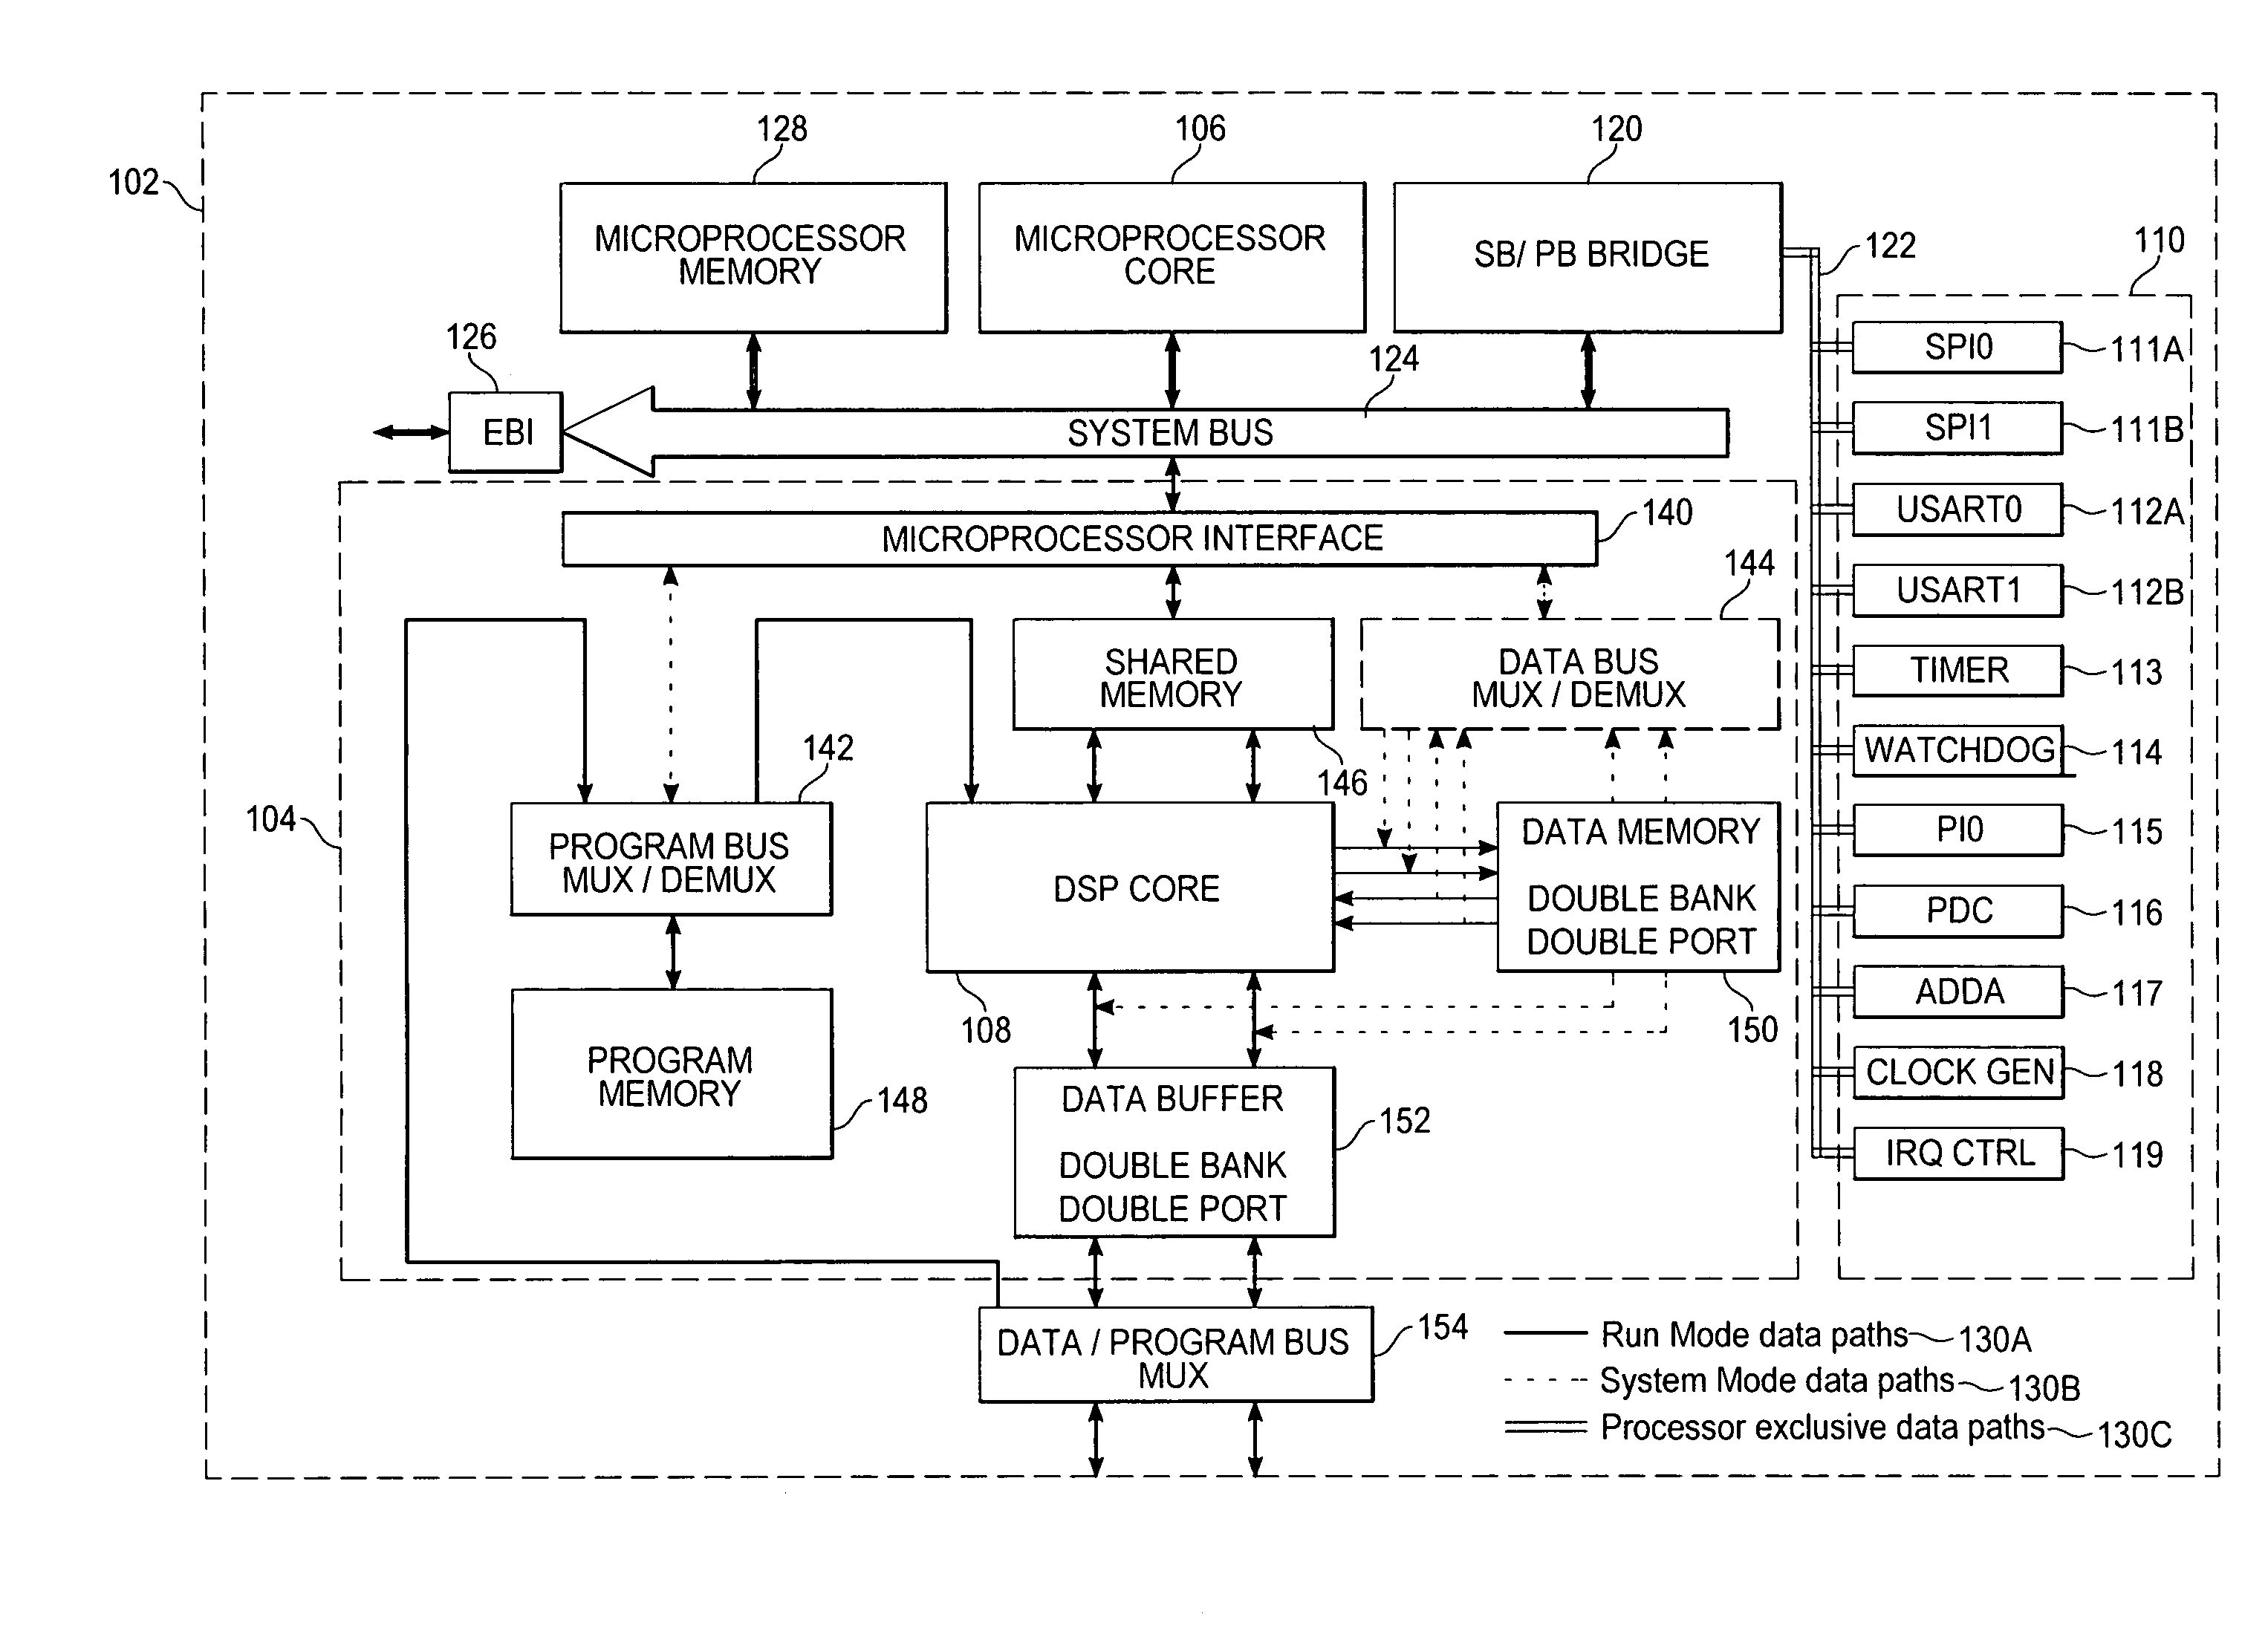 Complex domain floating point VLIW DSP with data/program bus multiplexer and microprocessor interface